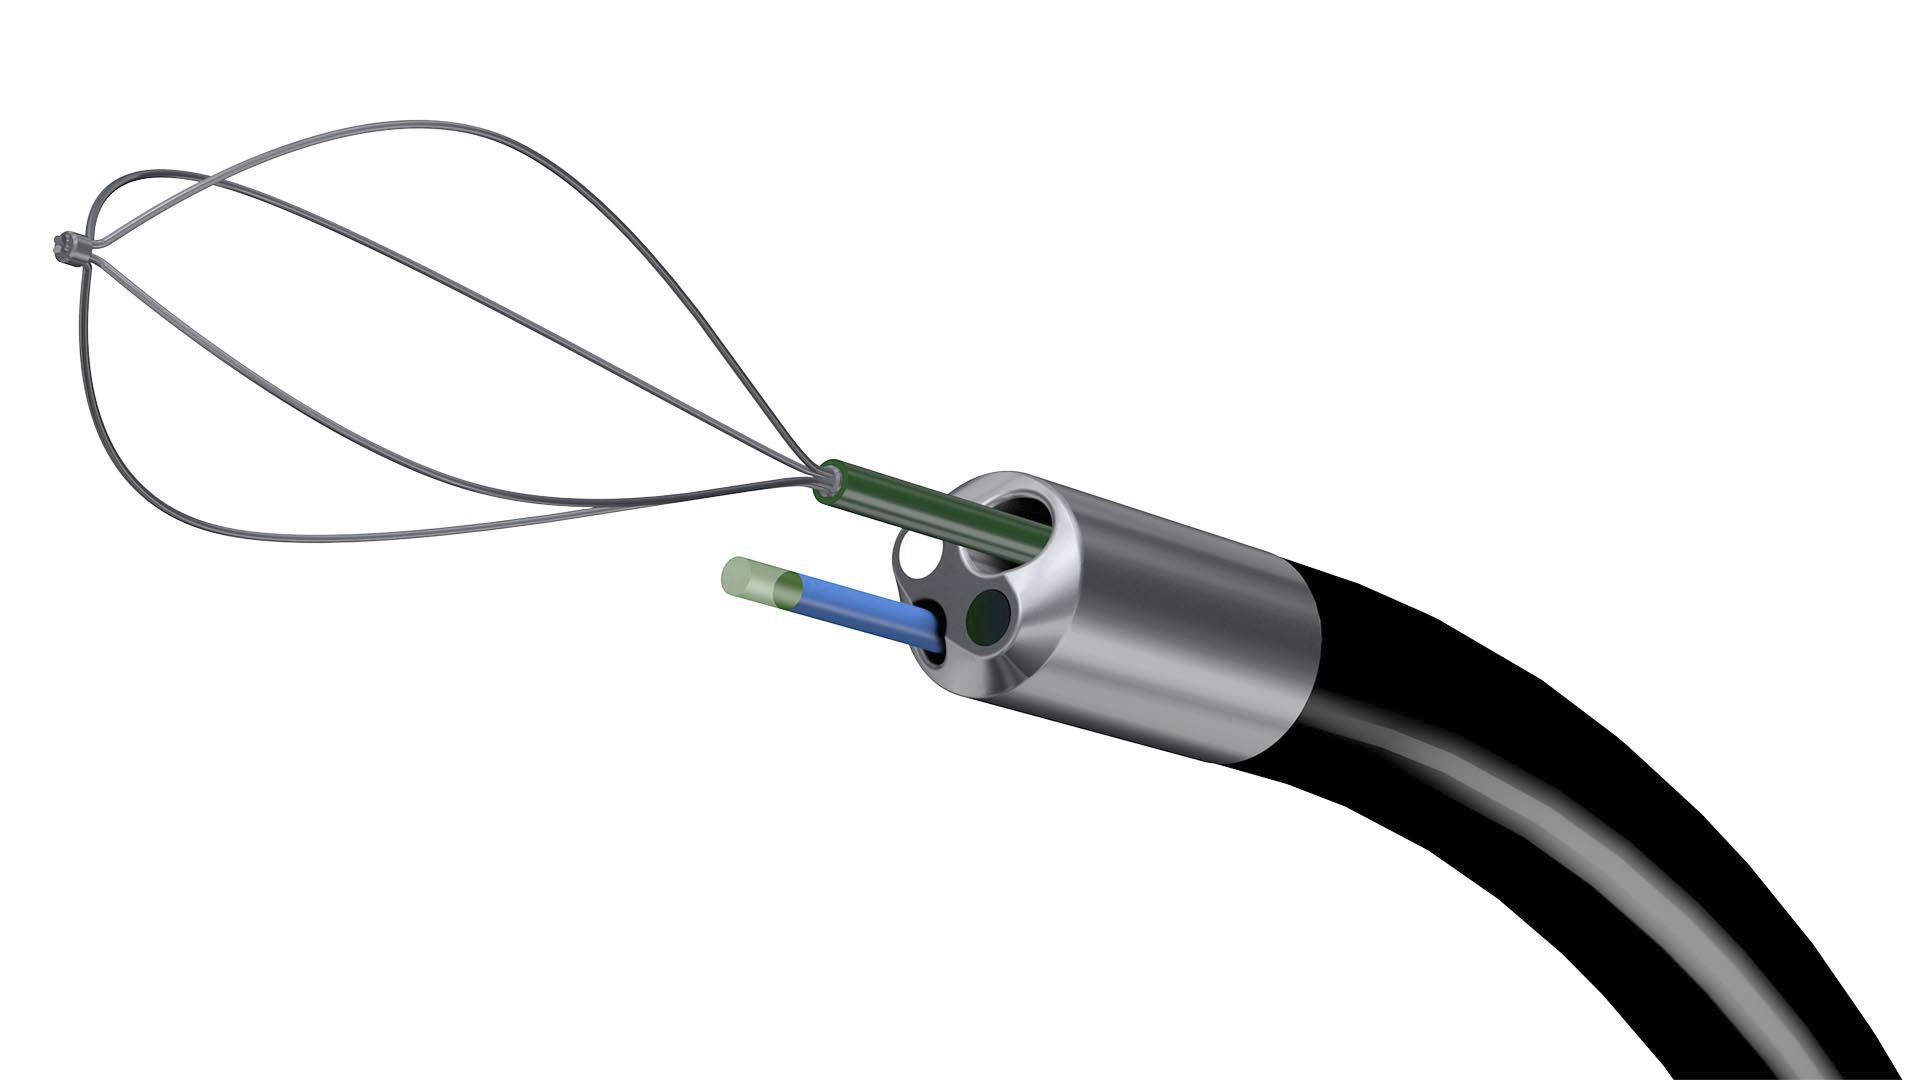 Uretero-nephroscope endoscope / with two working channels / semi-flexible / with optical fiber for laser COBRA vision Richard Wolf